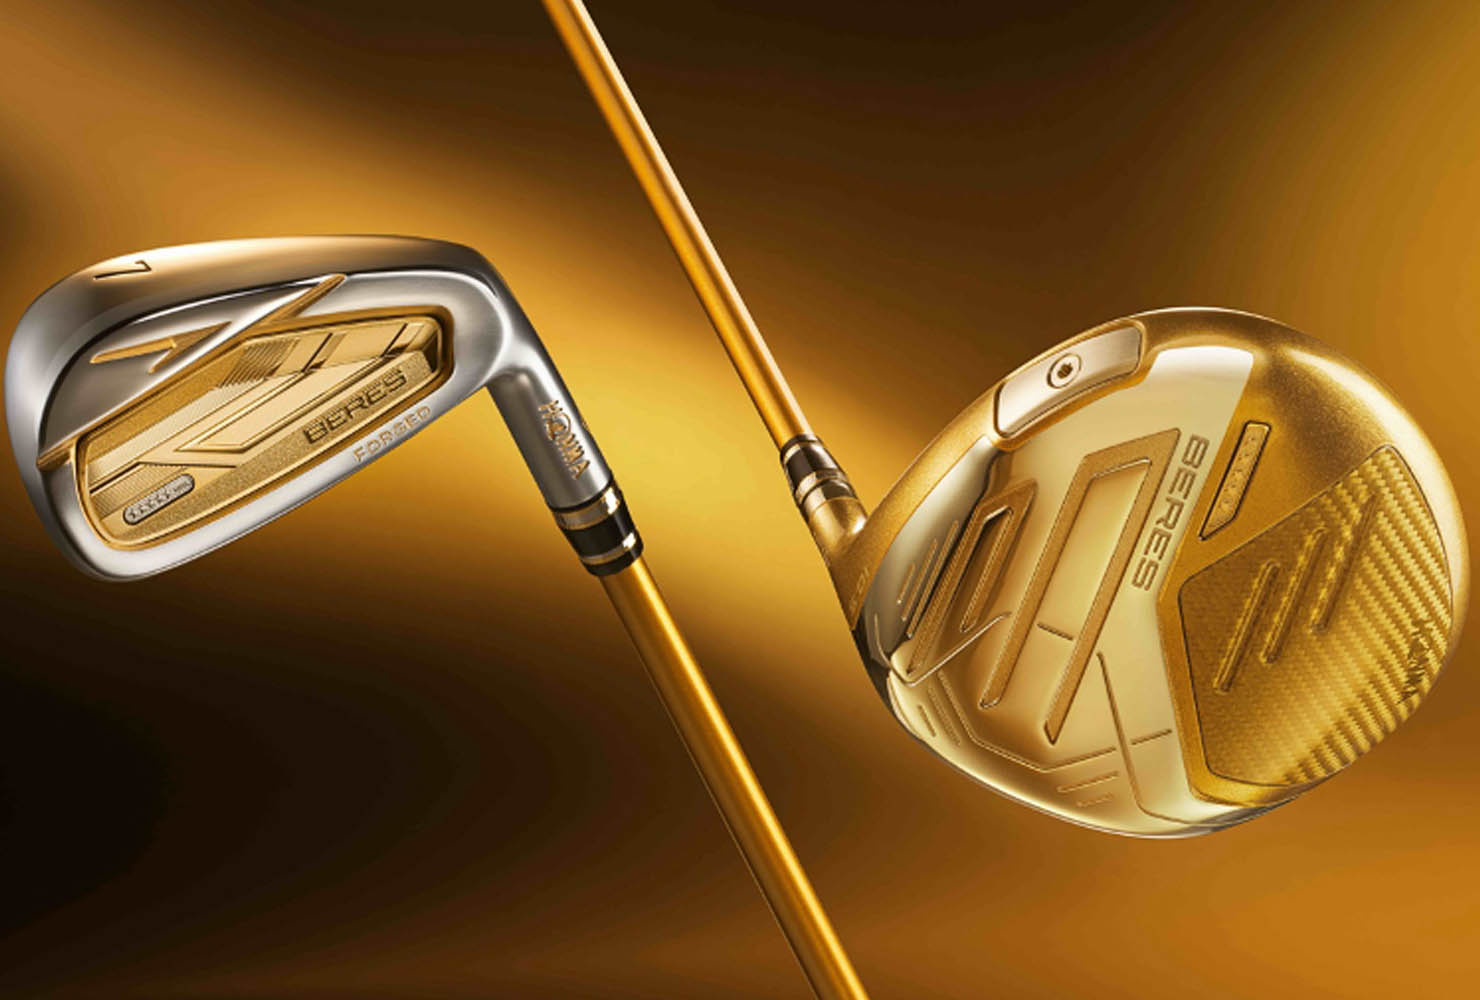 Honma Beres 09 Collection